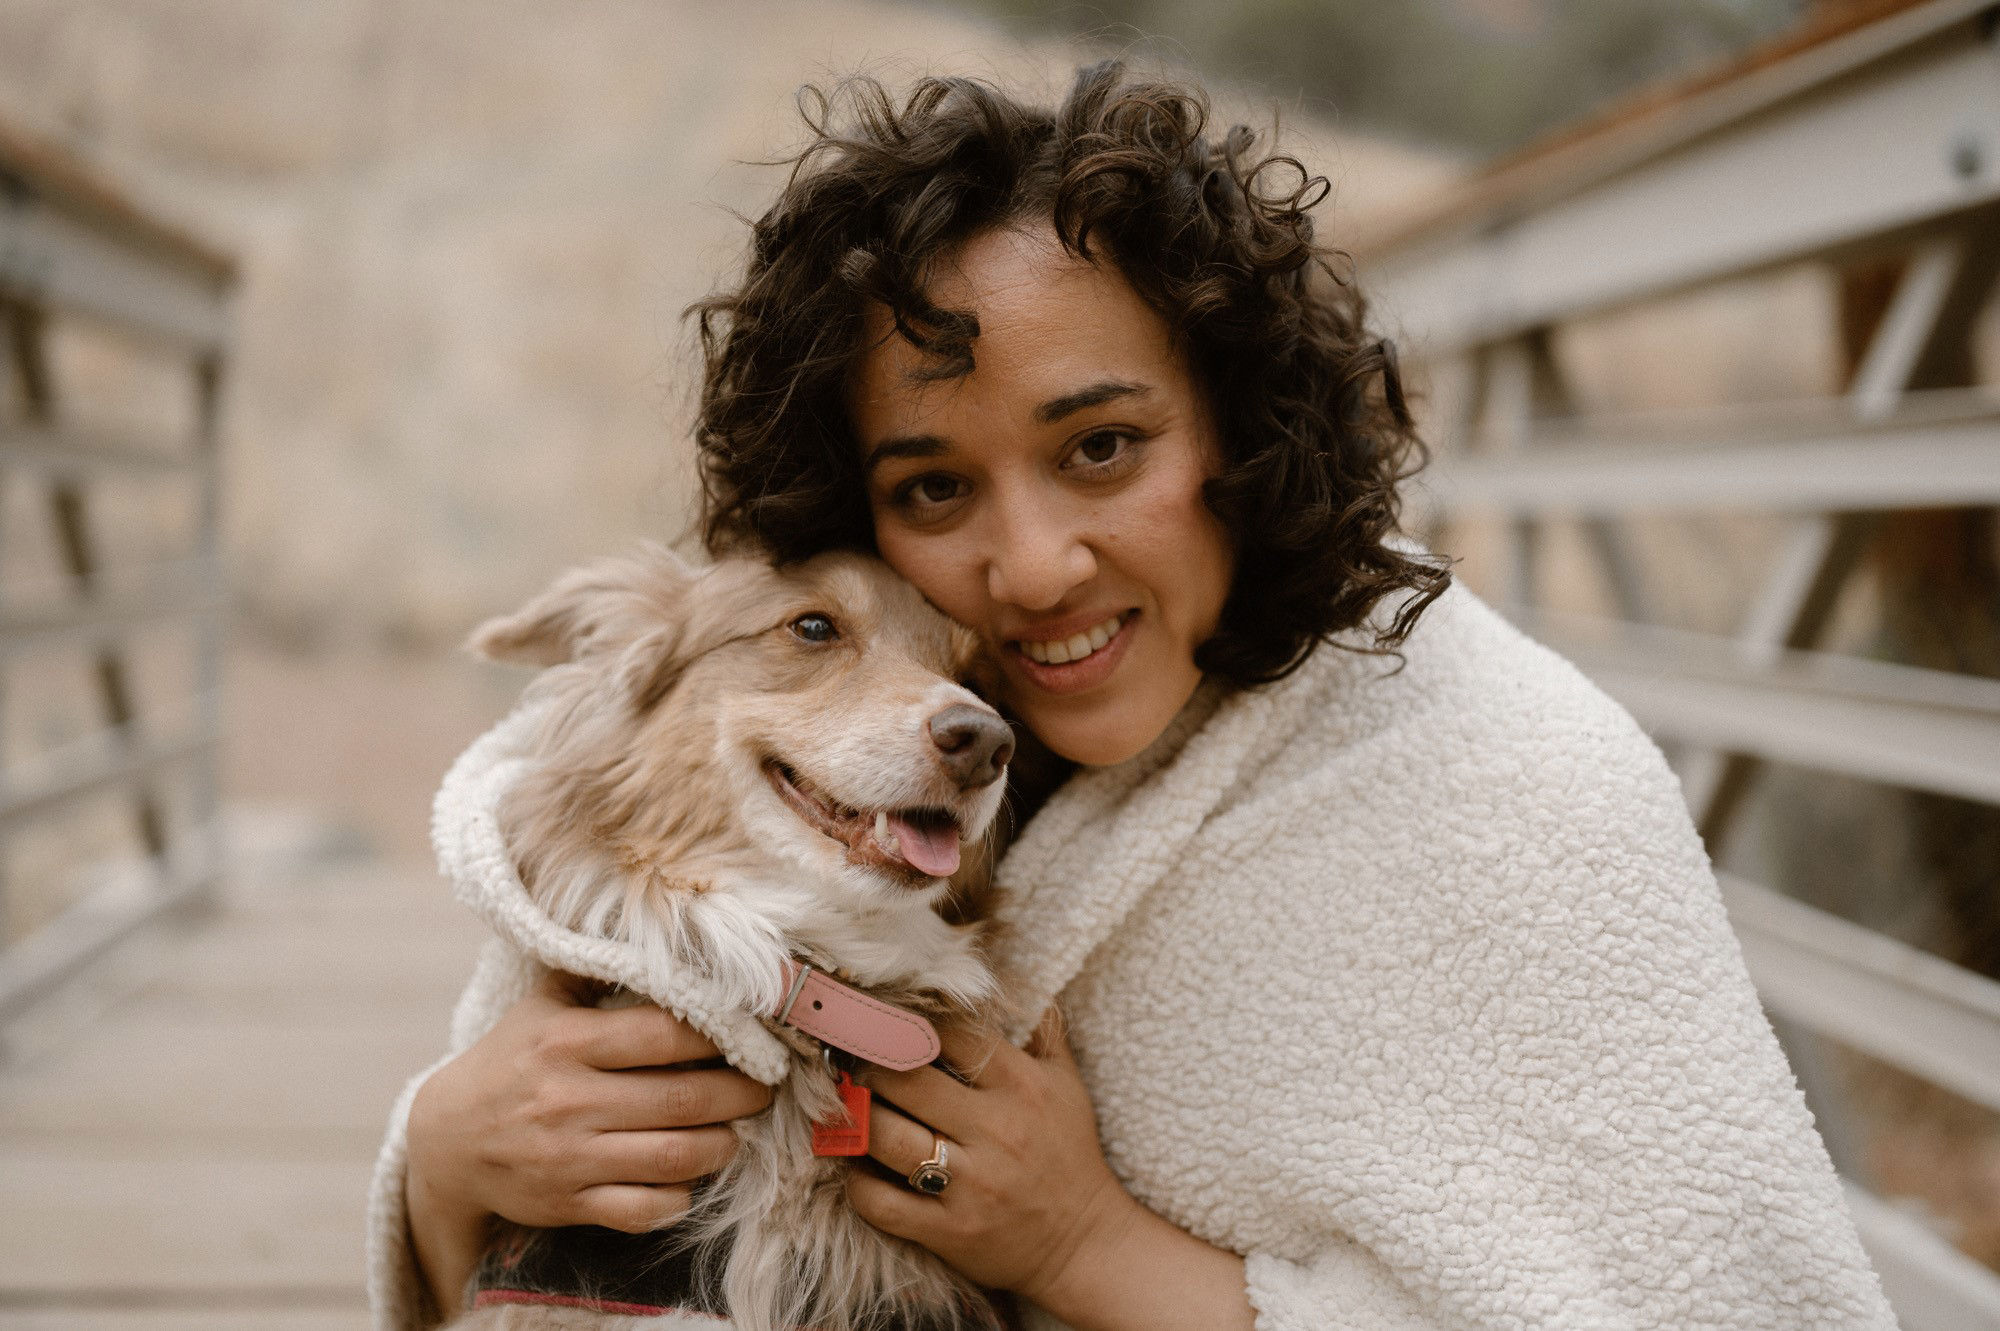 A photo of Mariana Marquez-Farmer posing for a portrait outside with her dog.